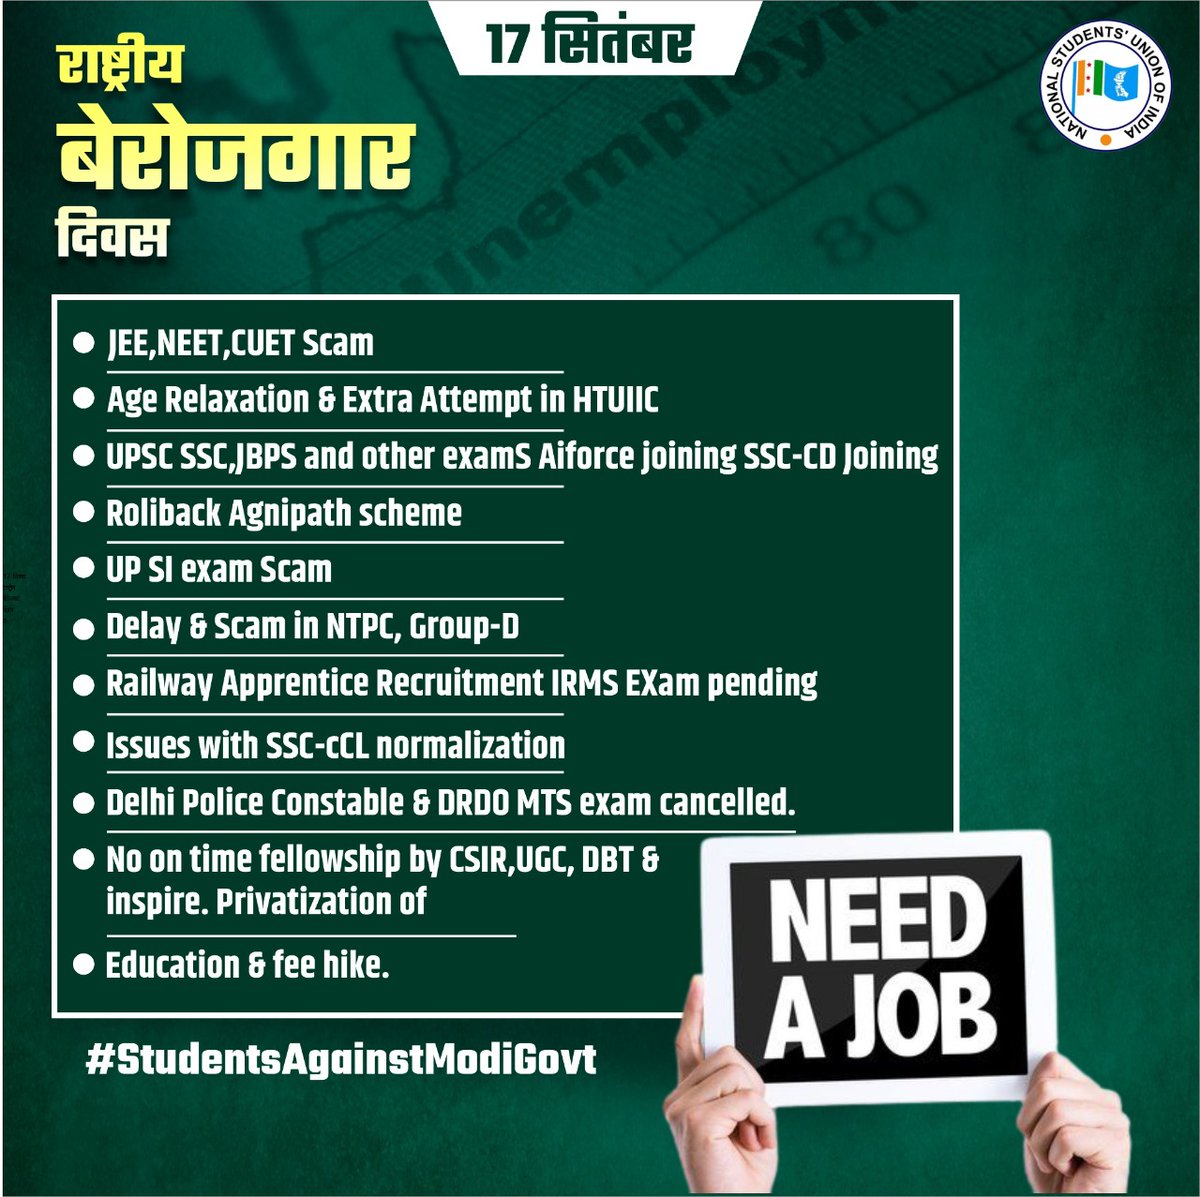 ◆NEET, JEE, CUET Scam & Technical Glitches
◆UPSC, JEE, IBPS, SSC, RRB Extra Attempt
◆Delay & Scam in NTPC, Group -D
◆Railway Apprentice Recruitment
◆Air Force Joining
◆SSC-GD Joining
◆IRMS Exam pending
◆CGL normalization

Be ready tomorrow 

#justicefordefencestudents